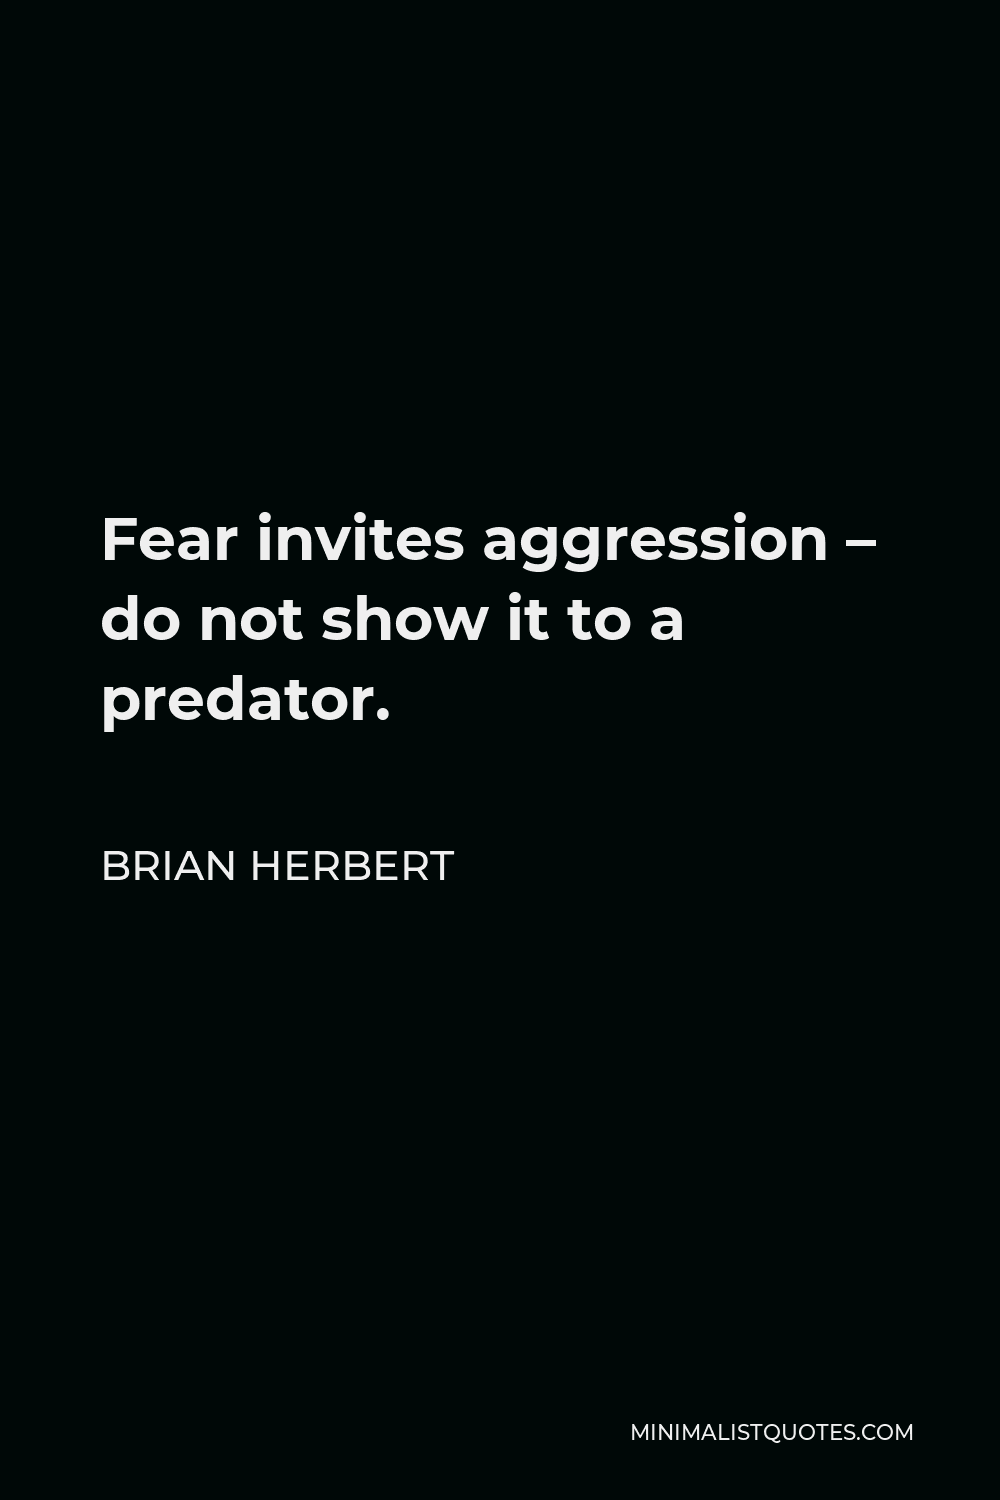 Brian Herbert Quote - Fear invites aggression – do not show it to a predator.